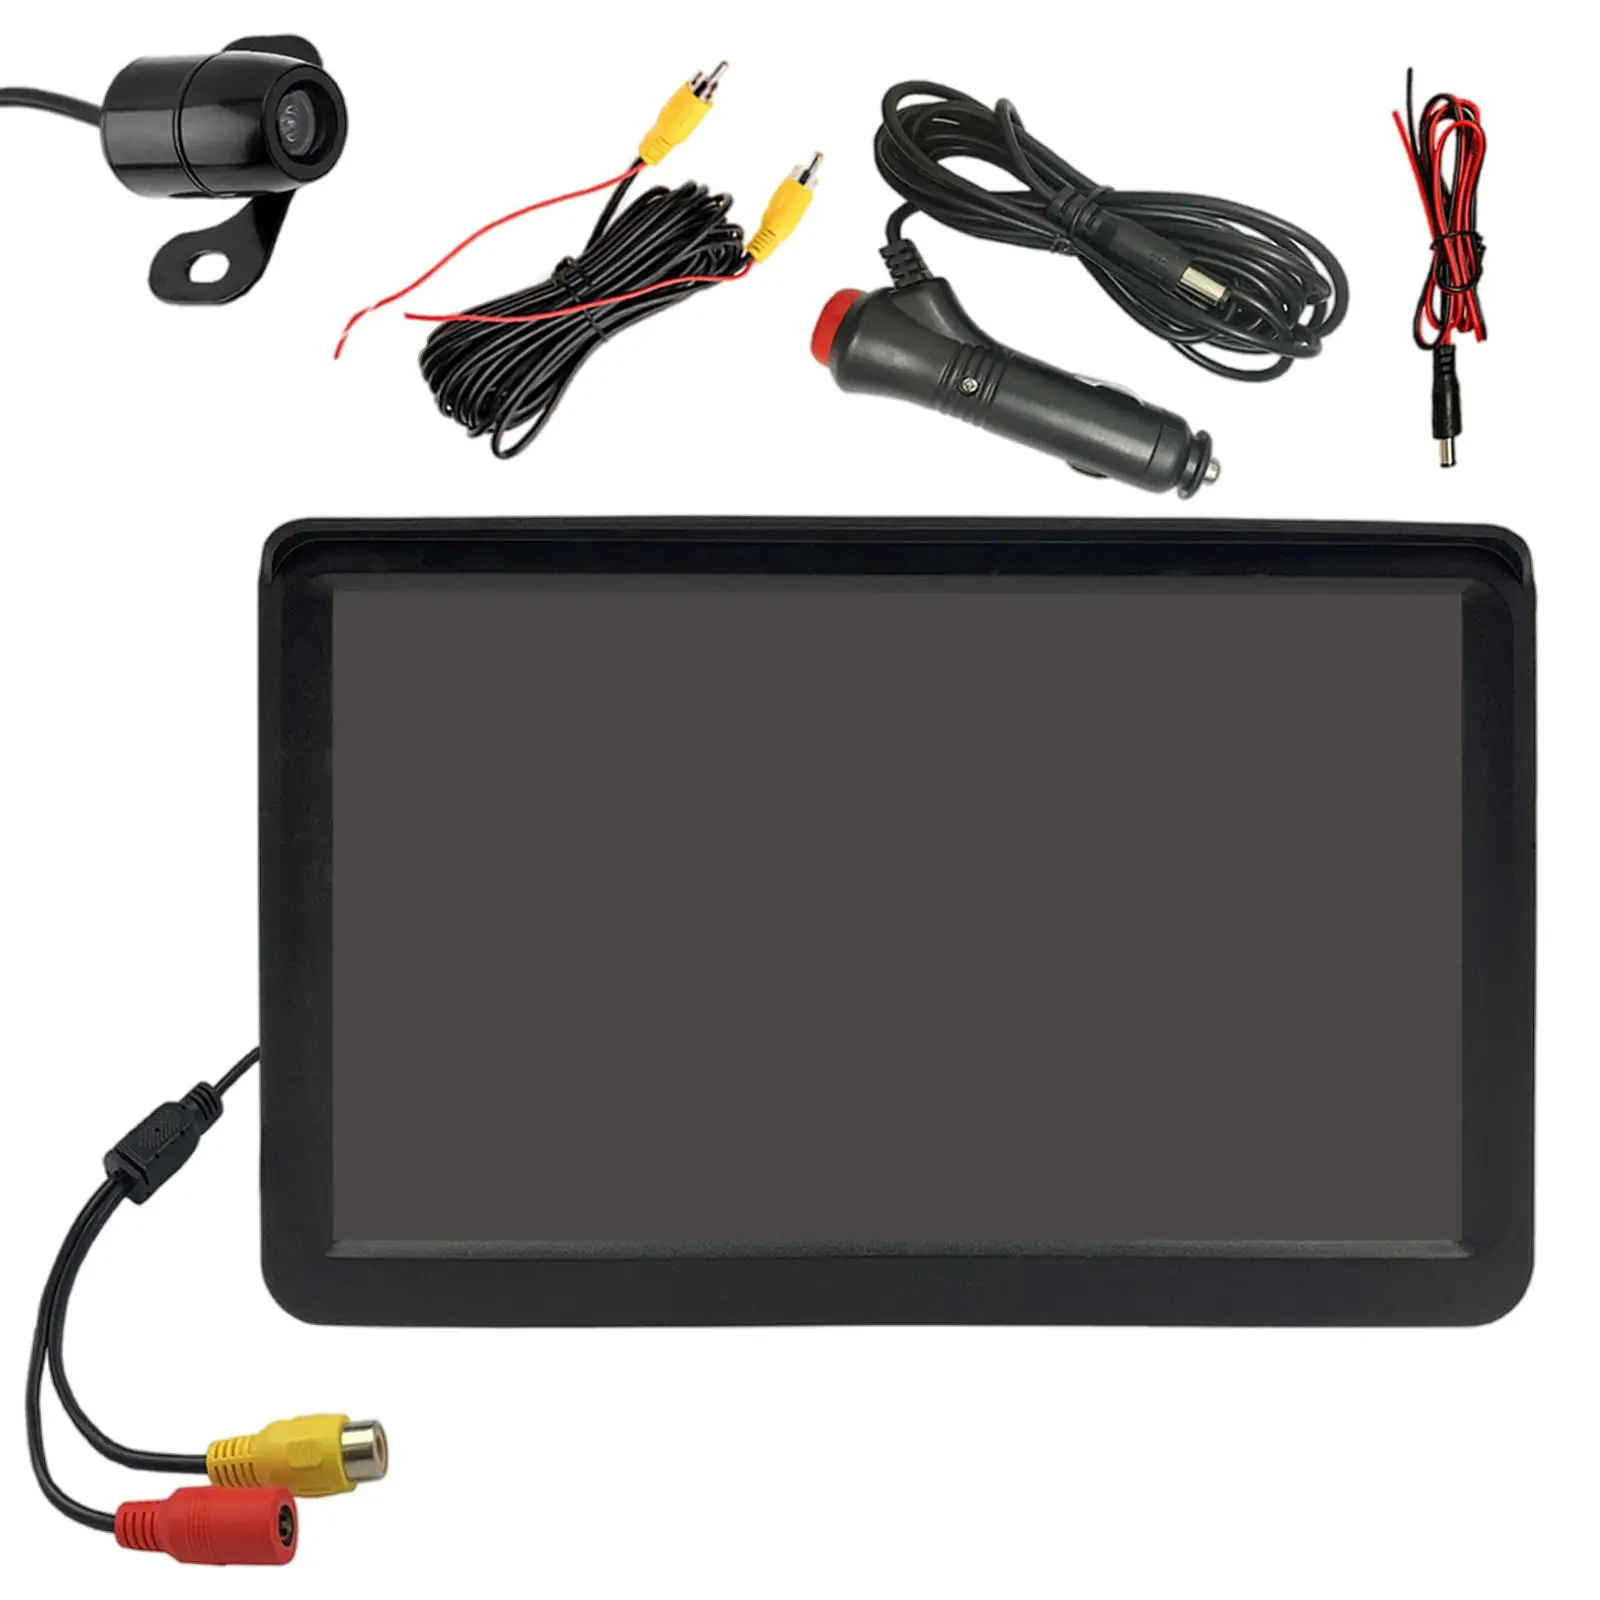  Car Monitor, LCD 7 inch 170° Wide Angle Scale Lines, Waterproof Lens, 12V , for Parking, Truck, Vehicles, SUV